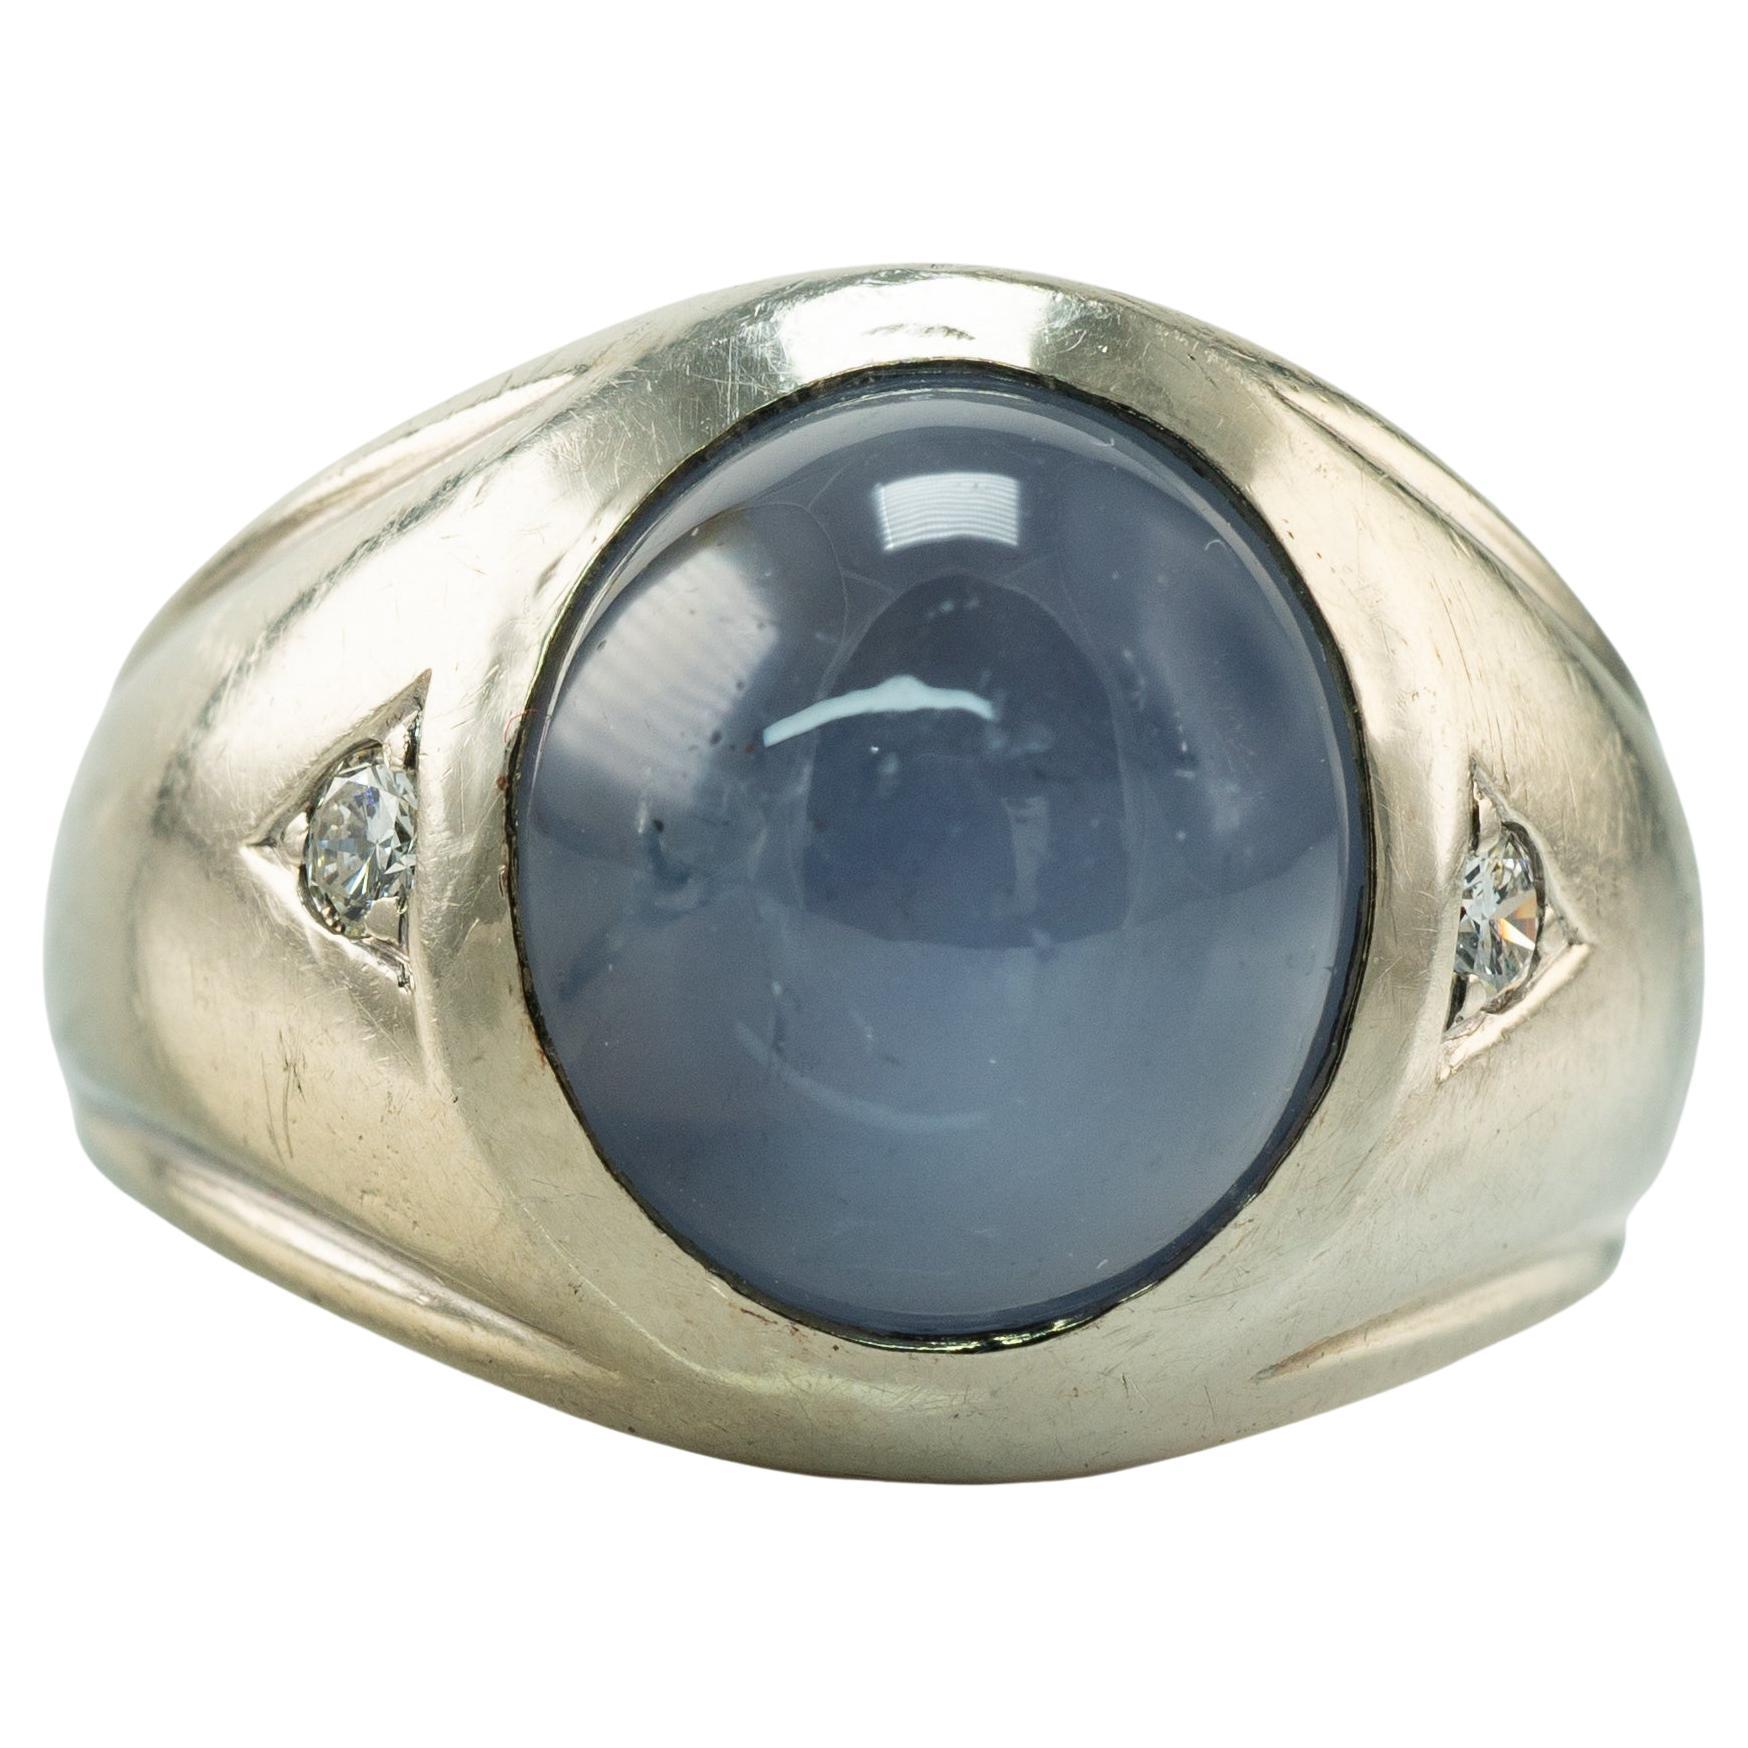 How can you tell if a star sapphire is natural?